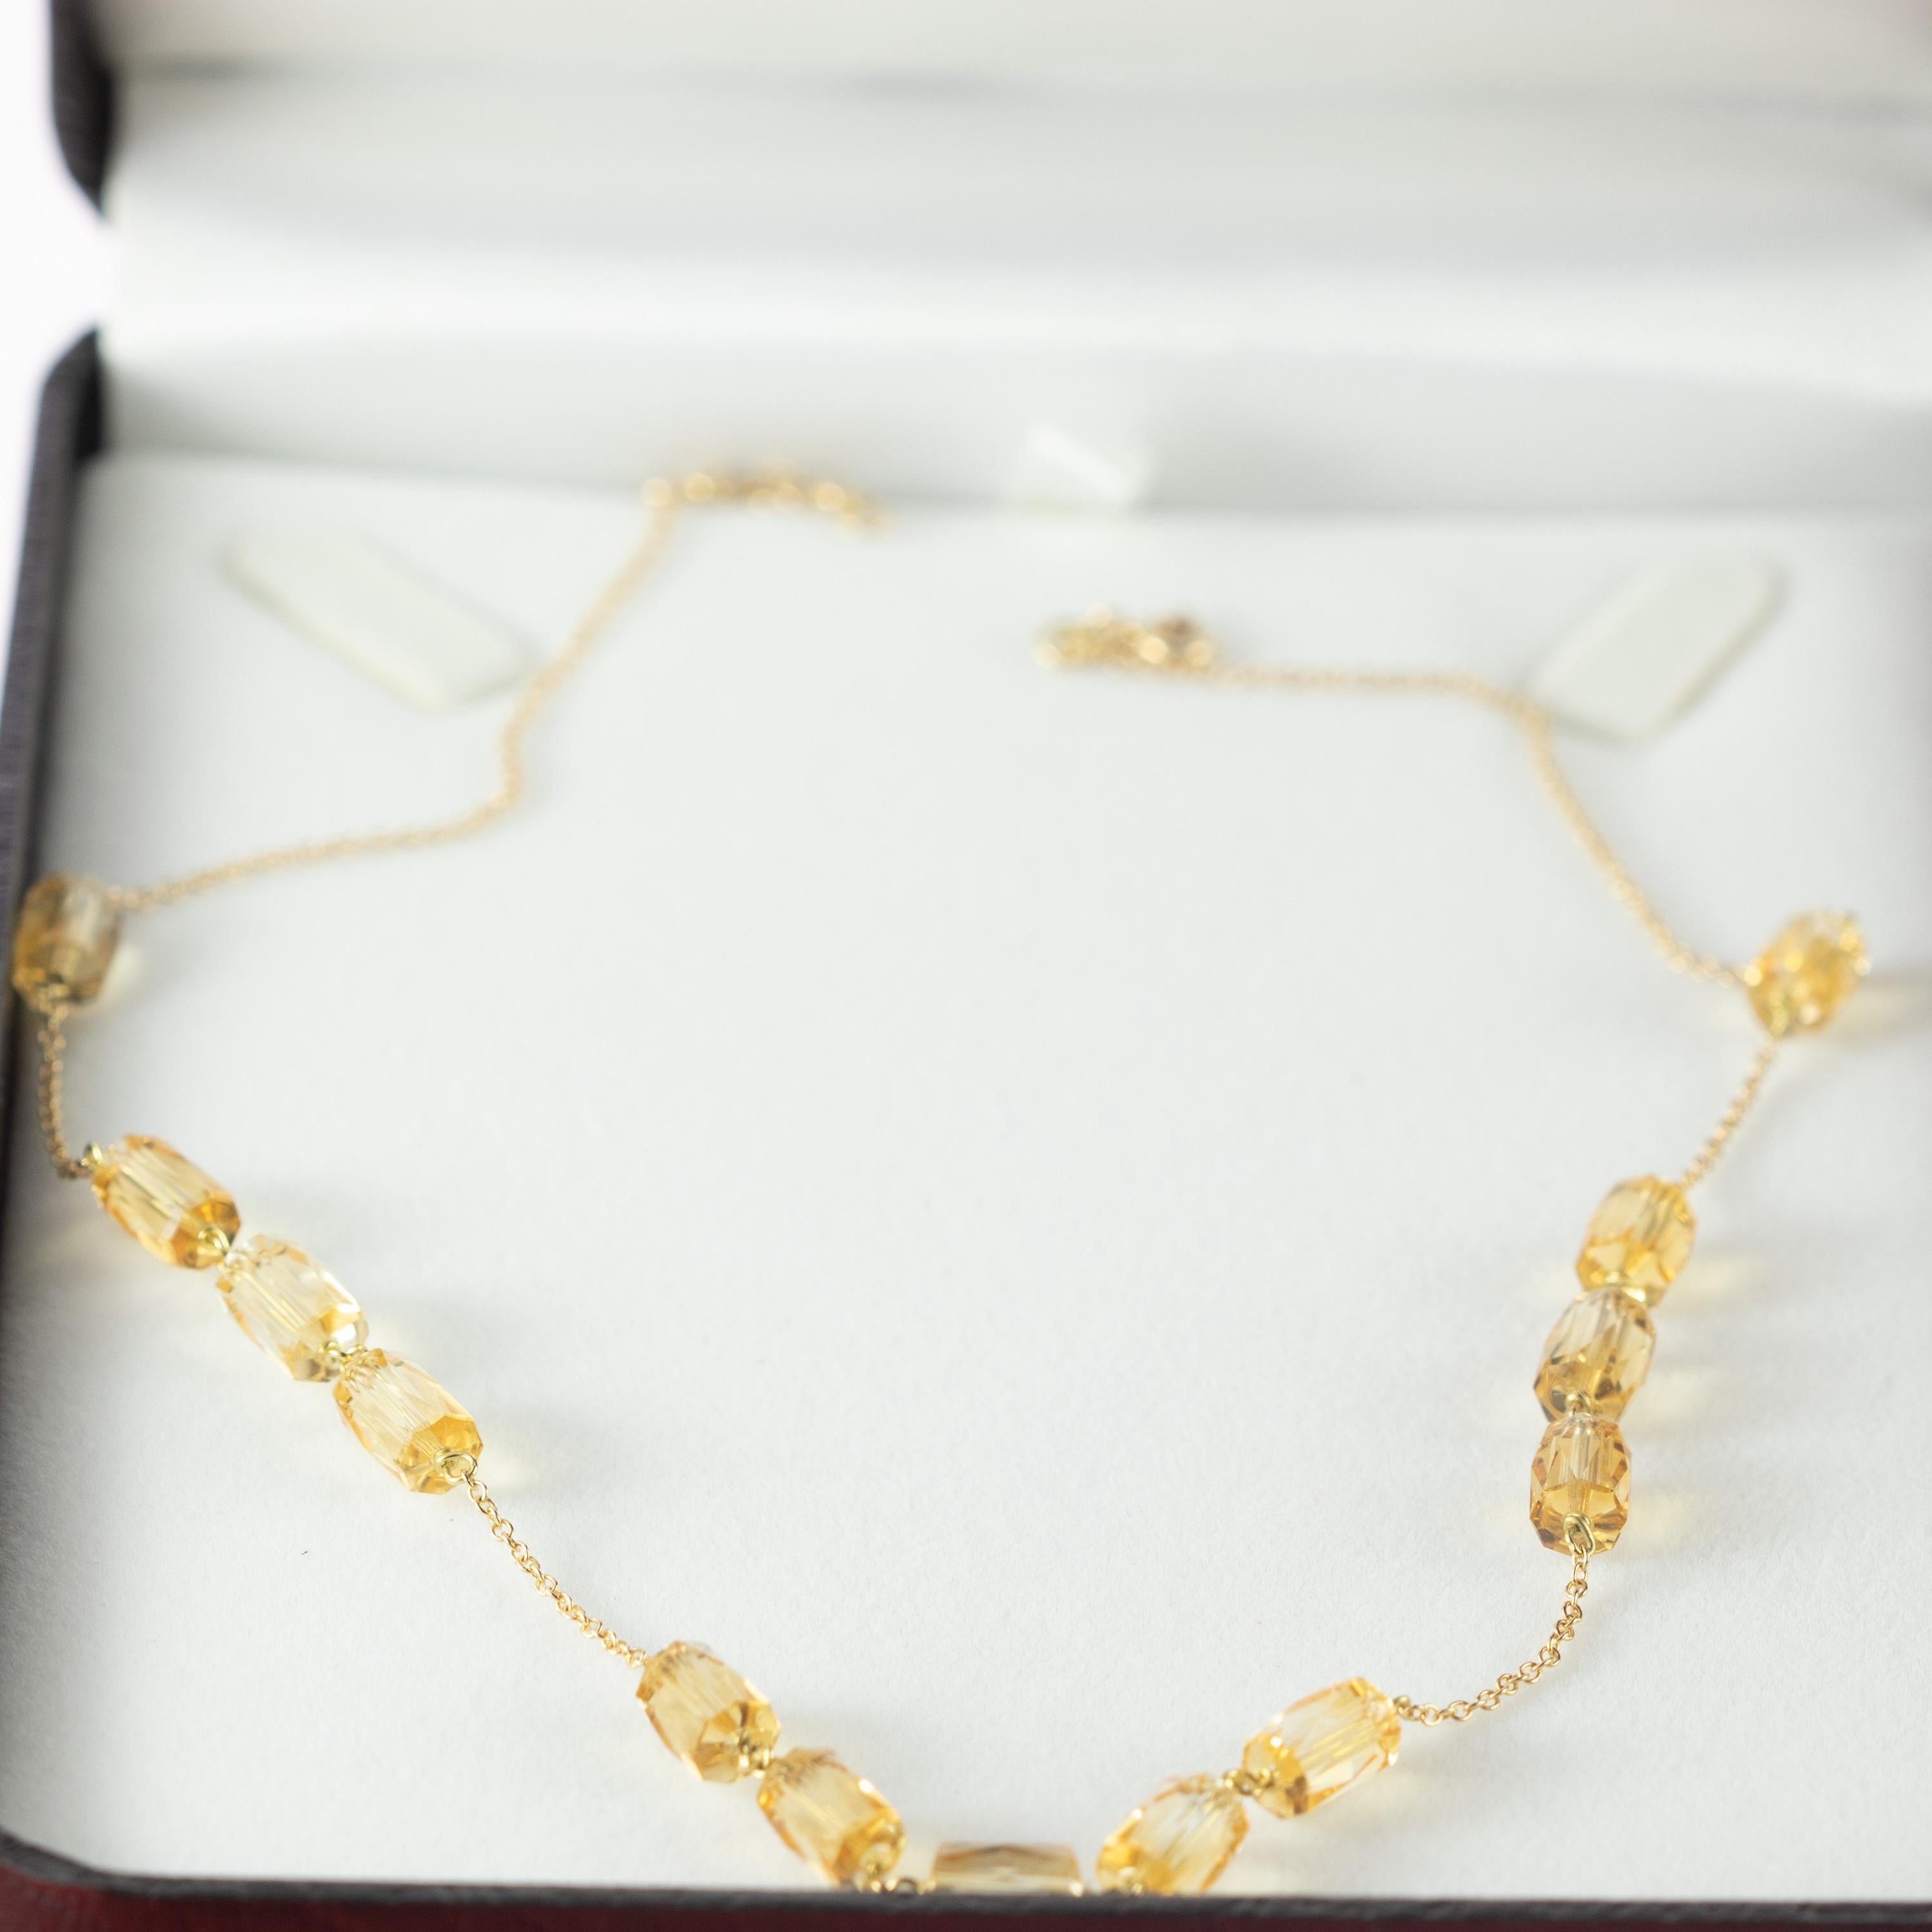 Art Nouveau Intini Jewels Citrine Tubets Beads 9 Karat Yellow Gold Chain Handmade Necklace For Sale